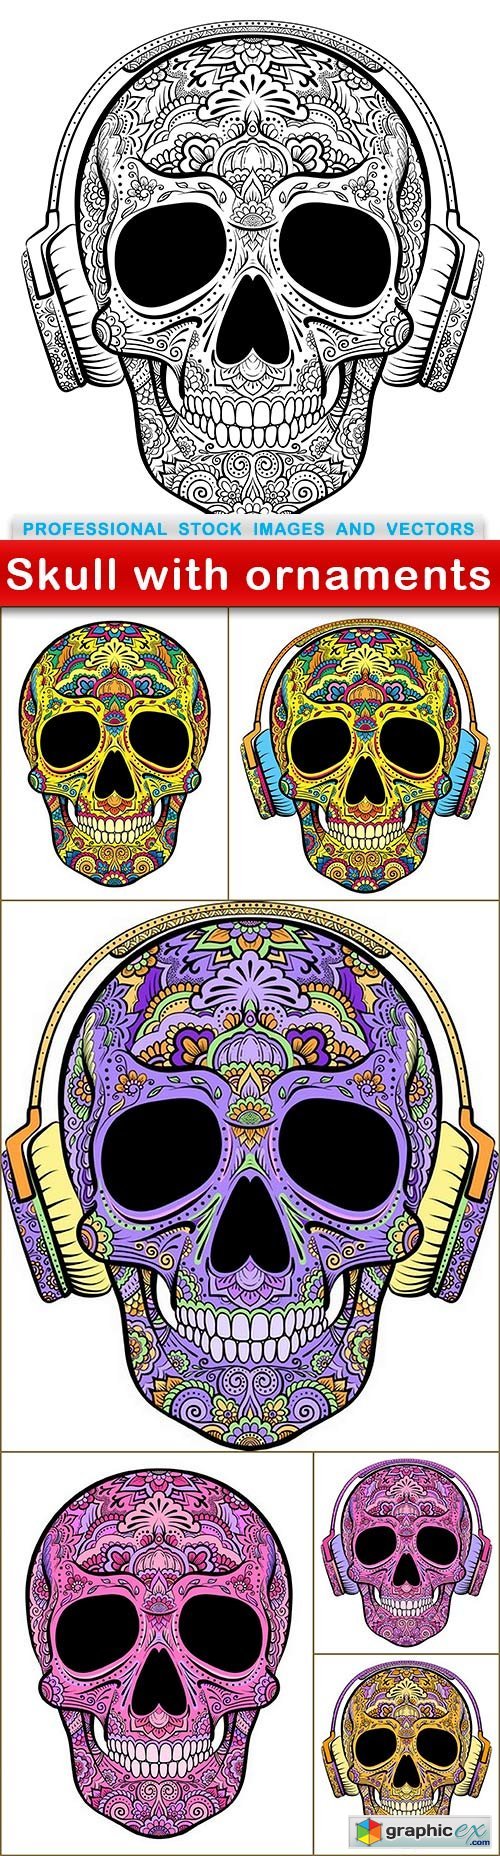 Skull with ornaments - 7 EPS